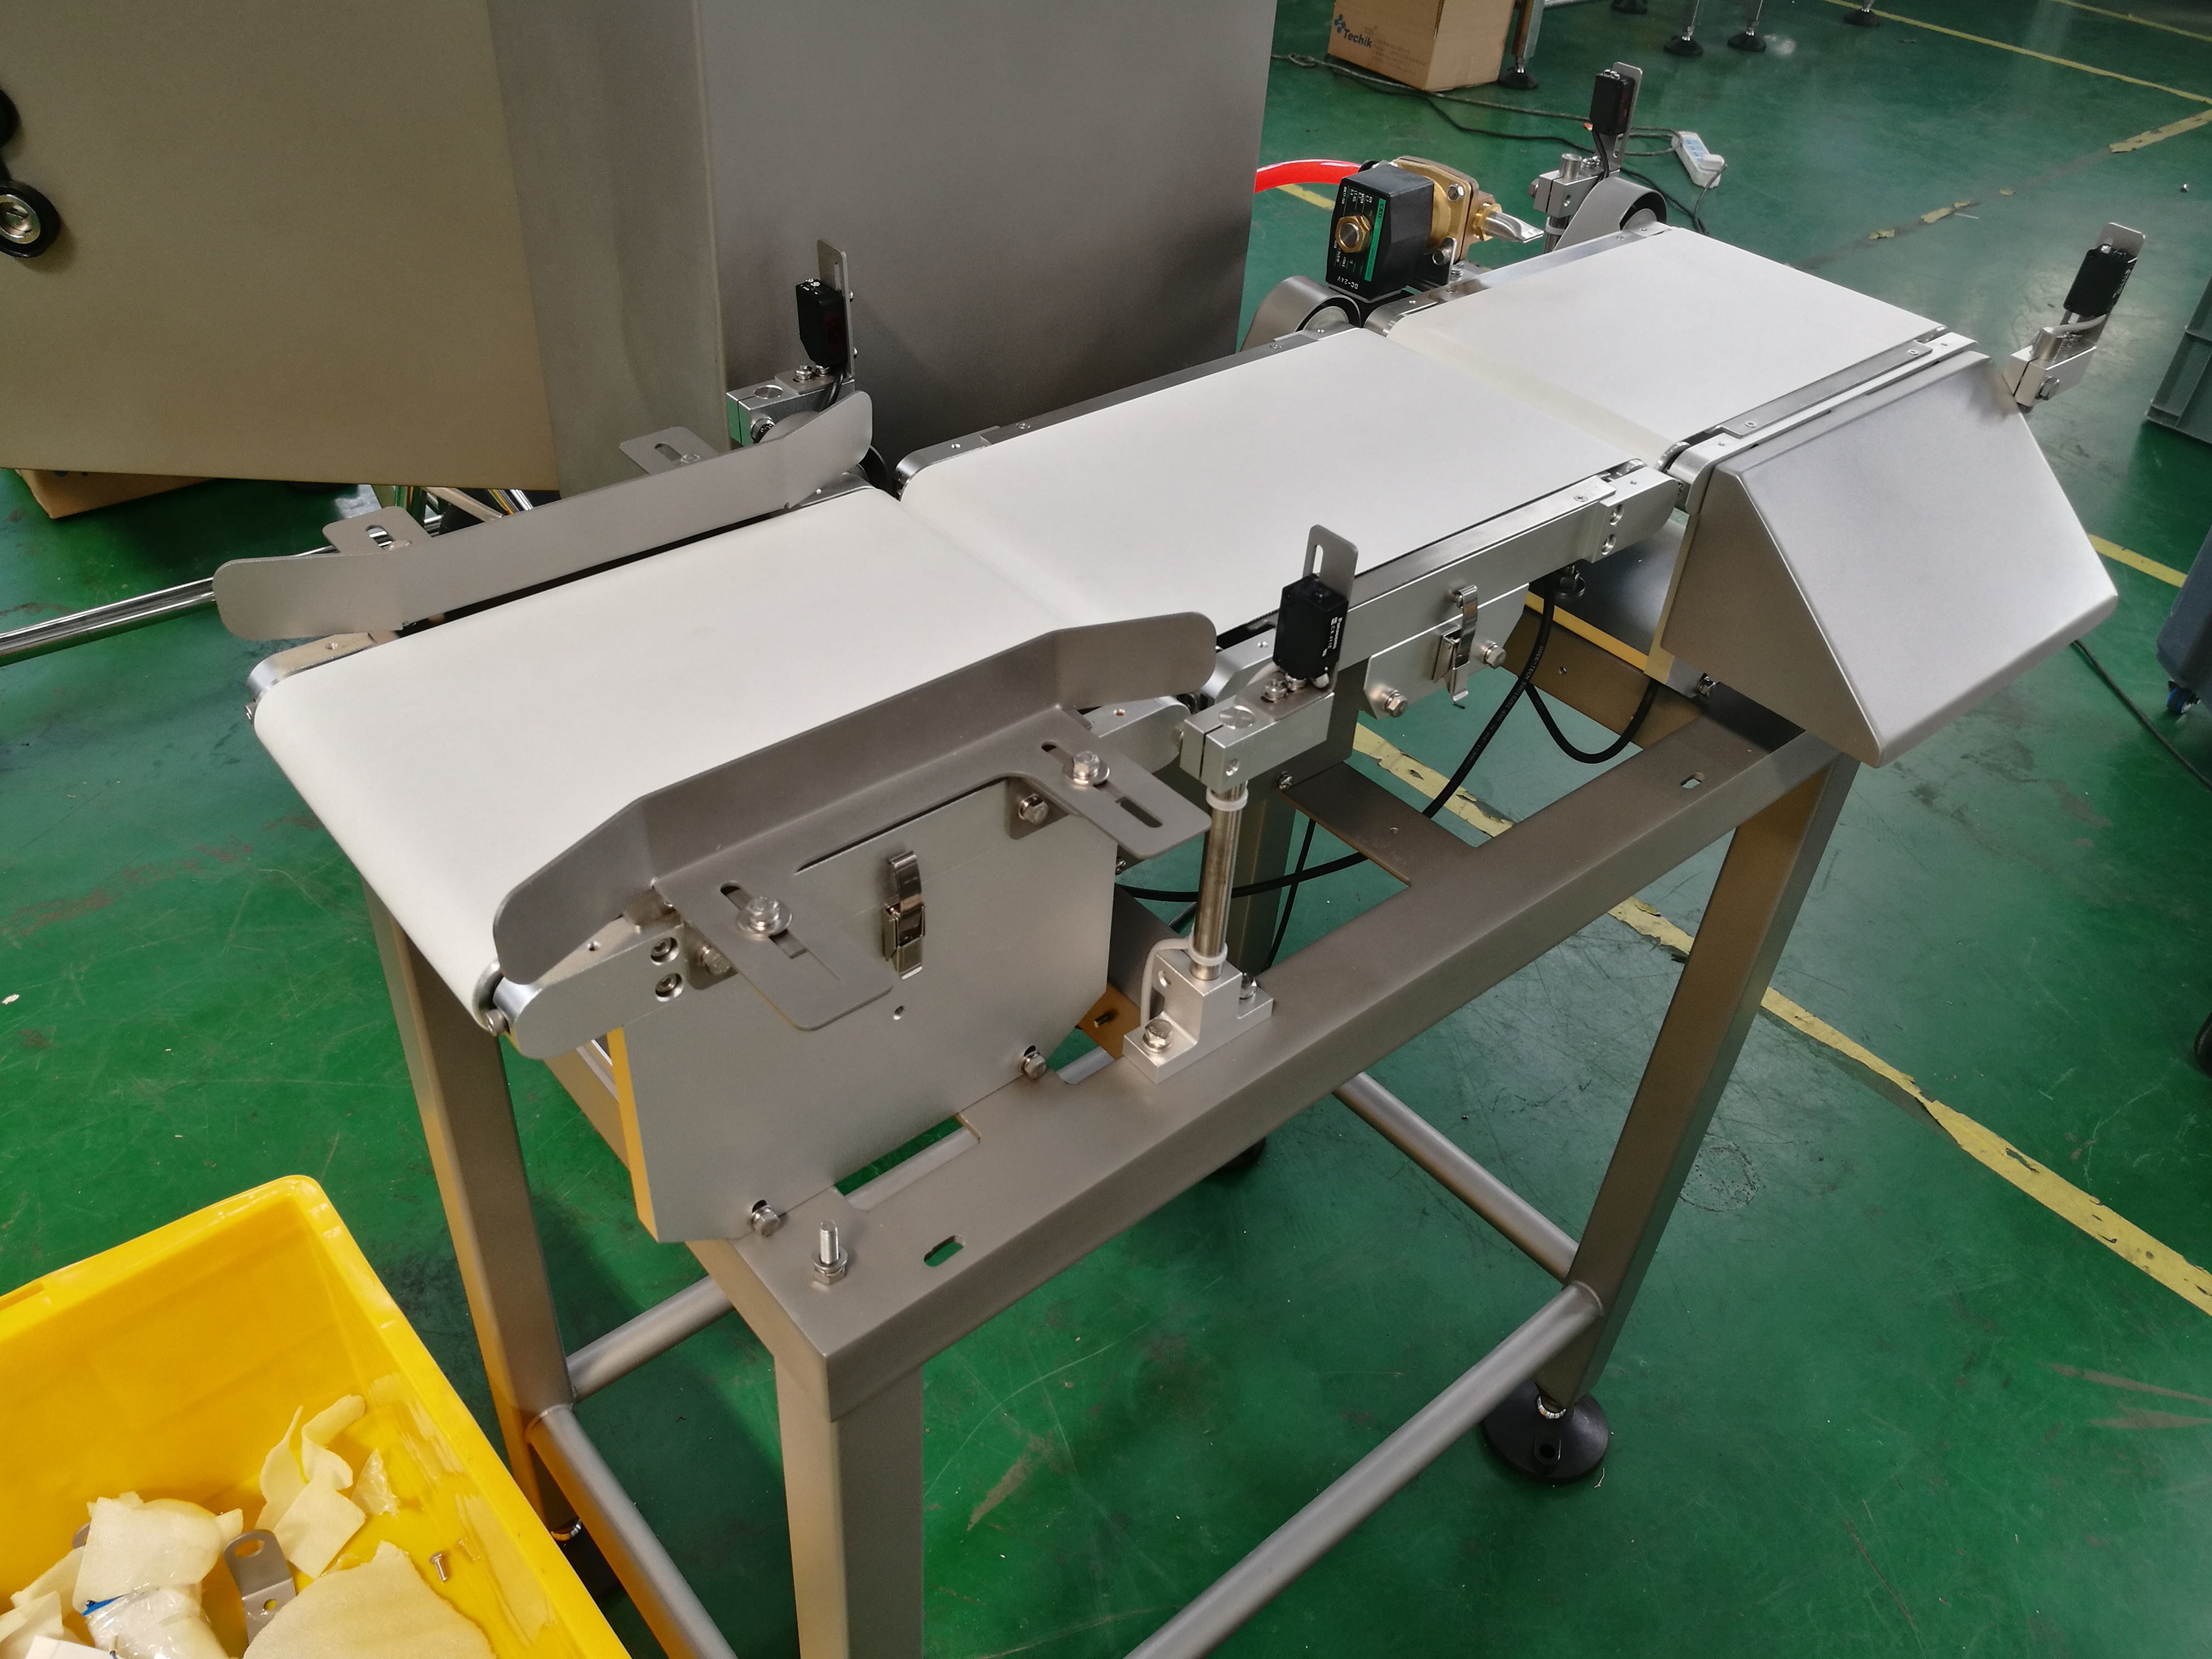 CE Waterproof Automatic Check Weigher With Rejector